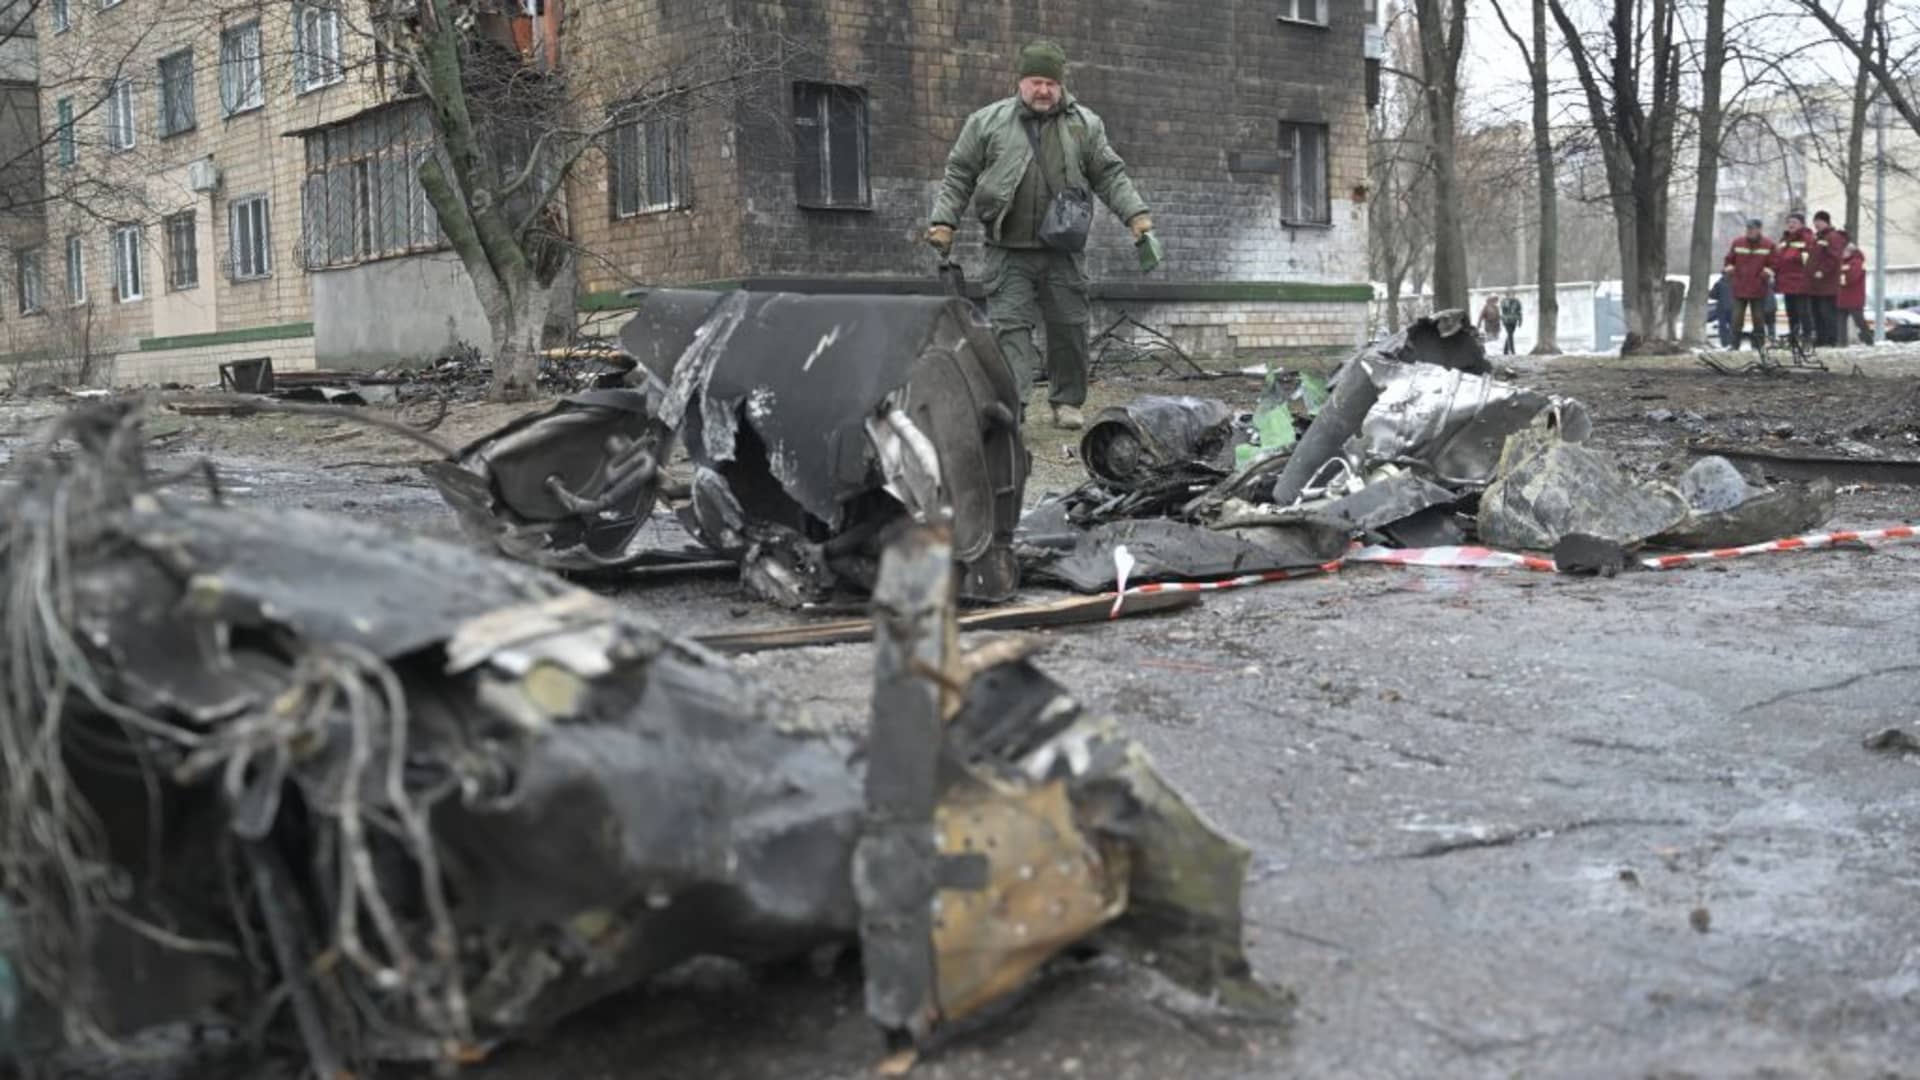 A law enforcement officer stands among the remains of an undetonated rocket next to a residential building following a missile attack in Kyiv on January 23, 2024. Dozens of people were injured and least four killed after a wave of Russian missiles targeted Kyiv and other cities across Ukraine, setting residential buildings ablaze and reducing others to rubble. (Photo by Genya SAVILOV / AFP) (Photo by GENYA SAVILOV/AFP via Getty Images)